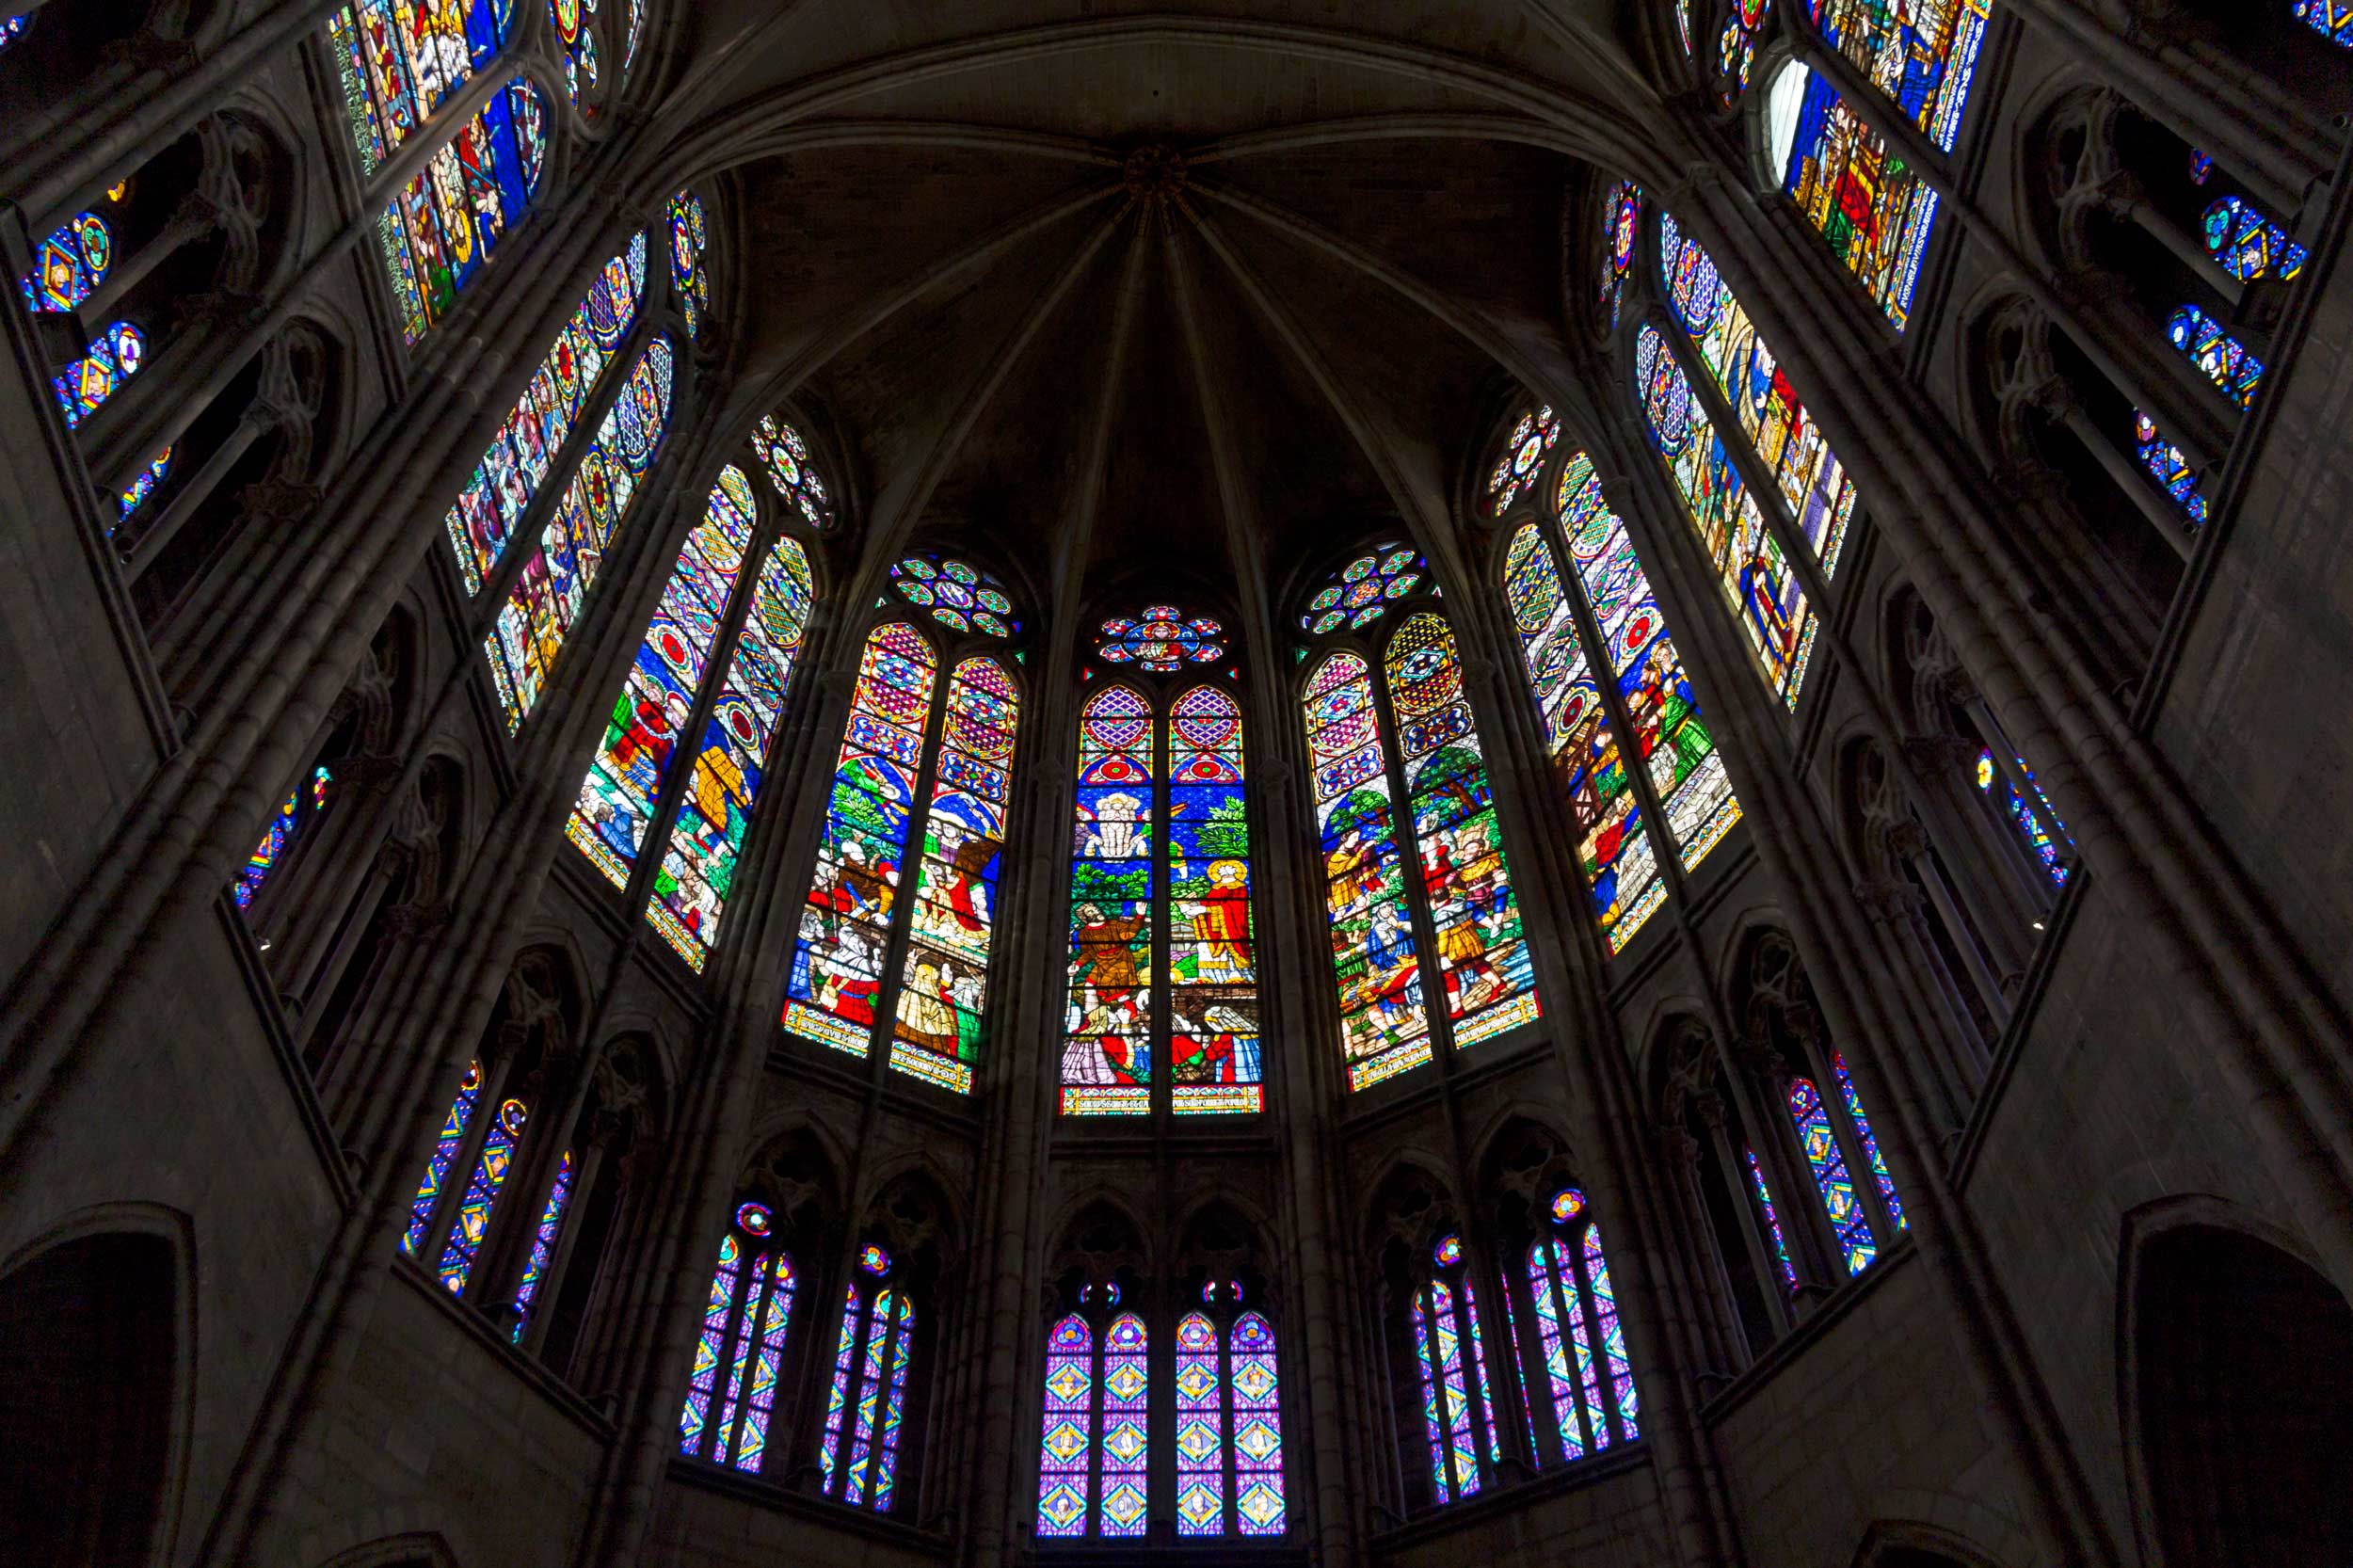 View of the stained glass windows in the apse of the Saint-Denis cathedral